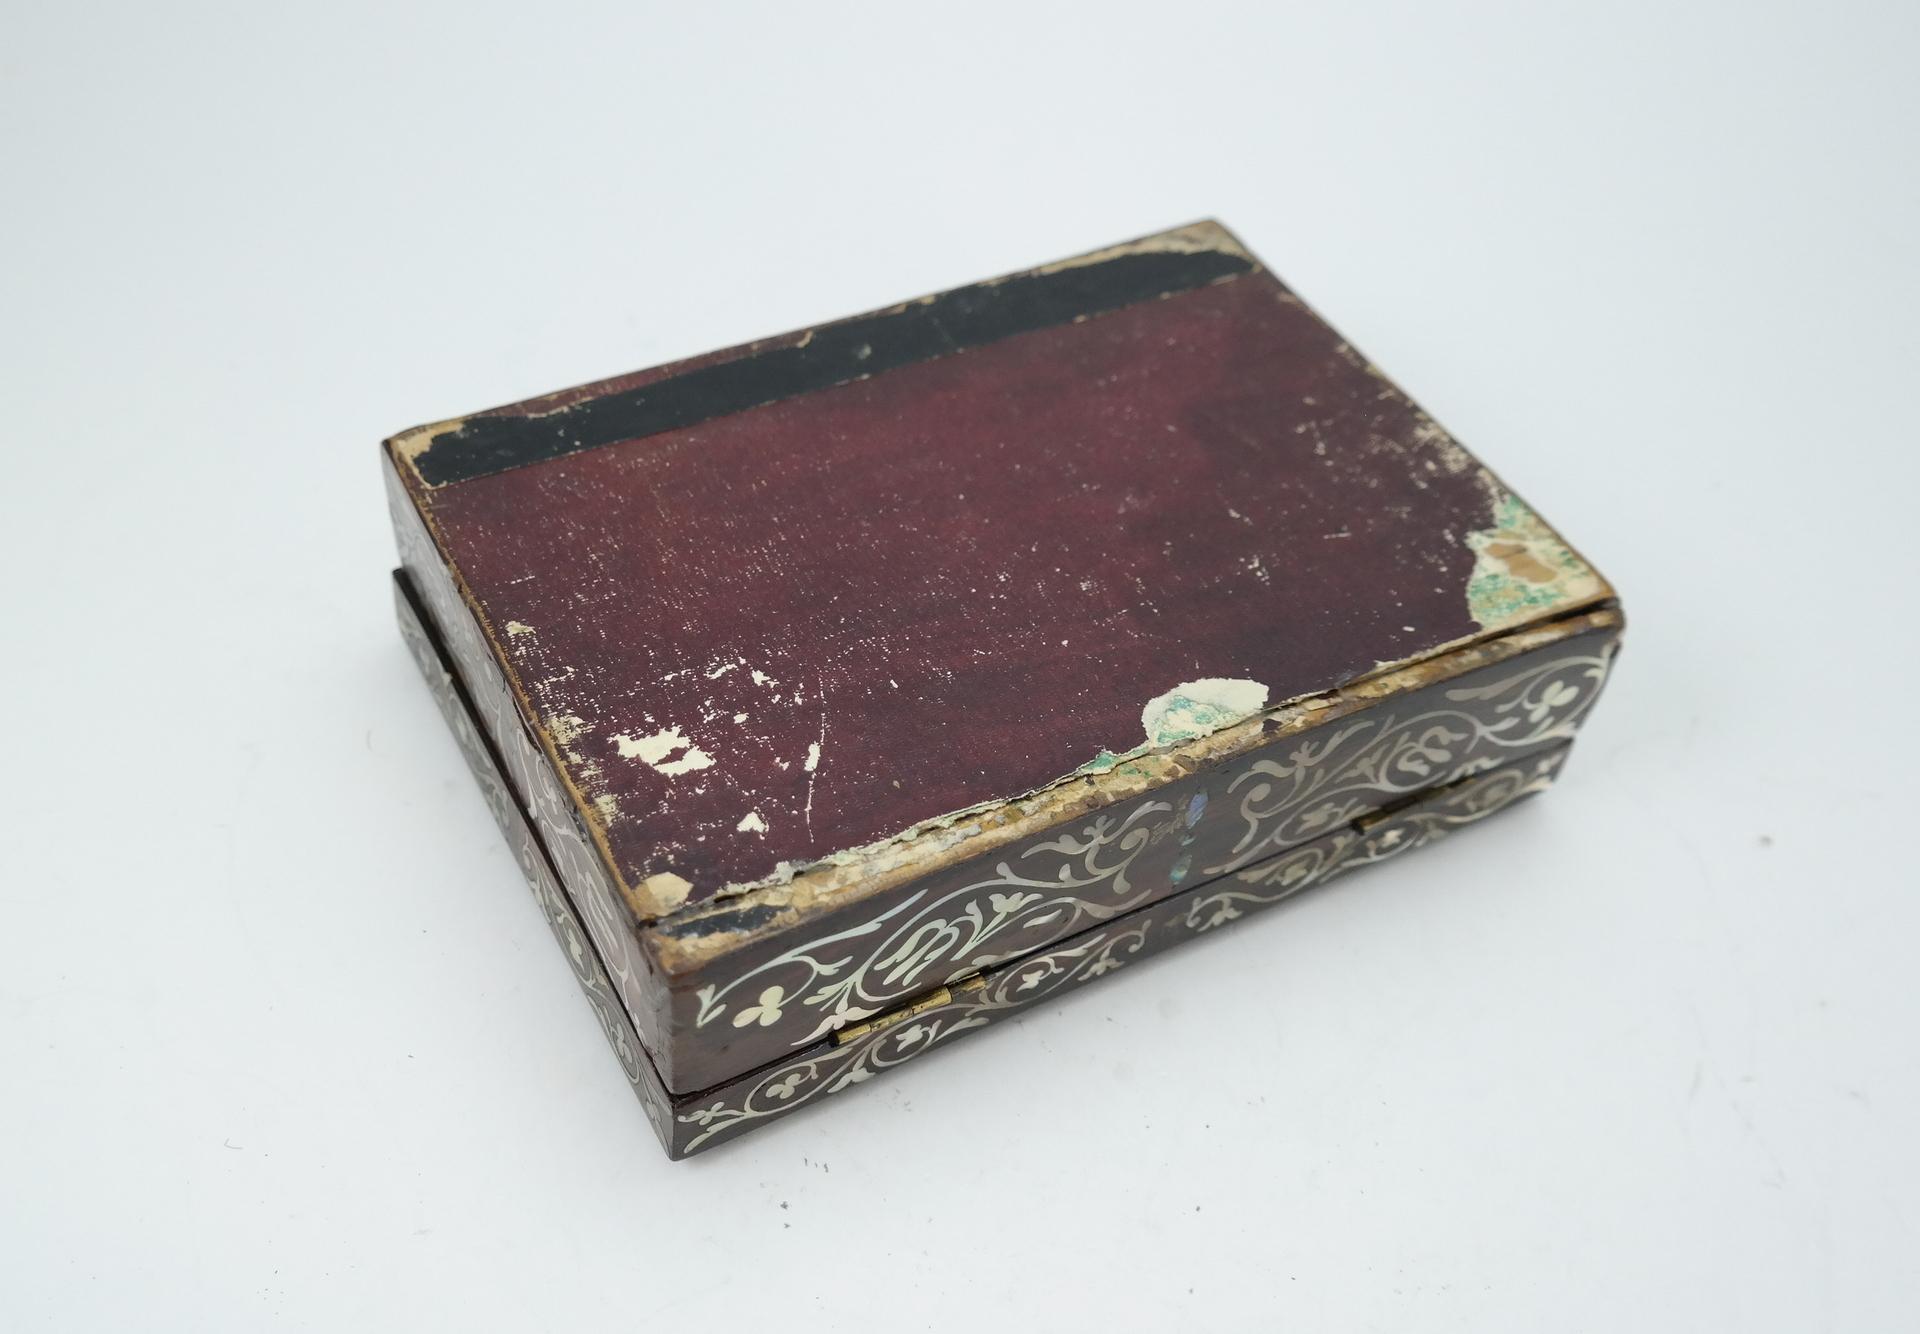 Mother-of-Pearl Wooden Jewelry/Trinket Box with Mother of Pearl Inlay, 19th Century